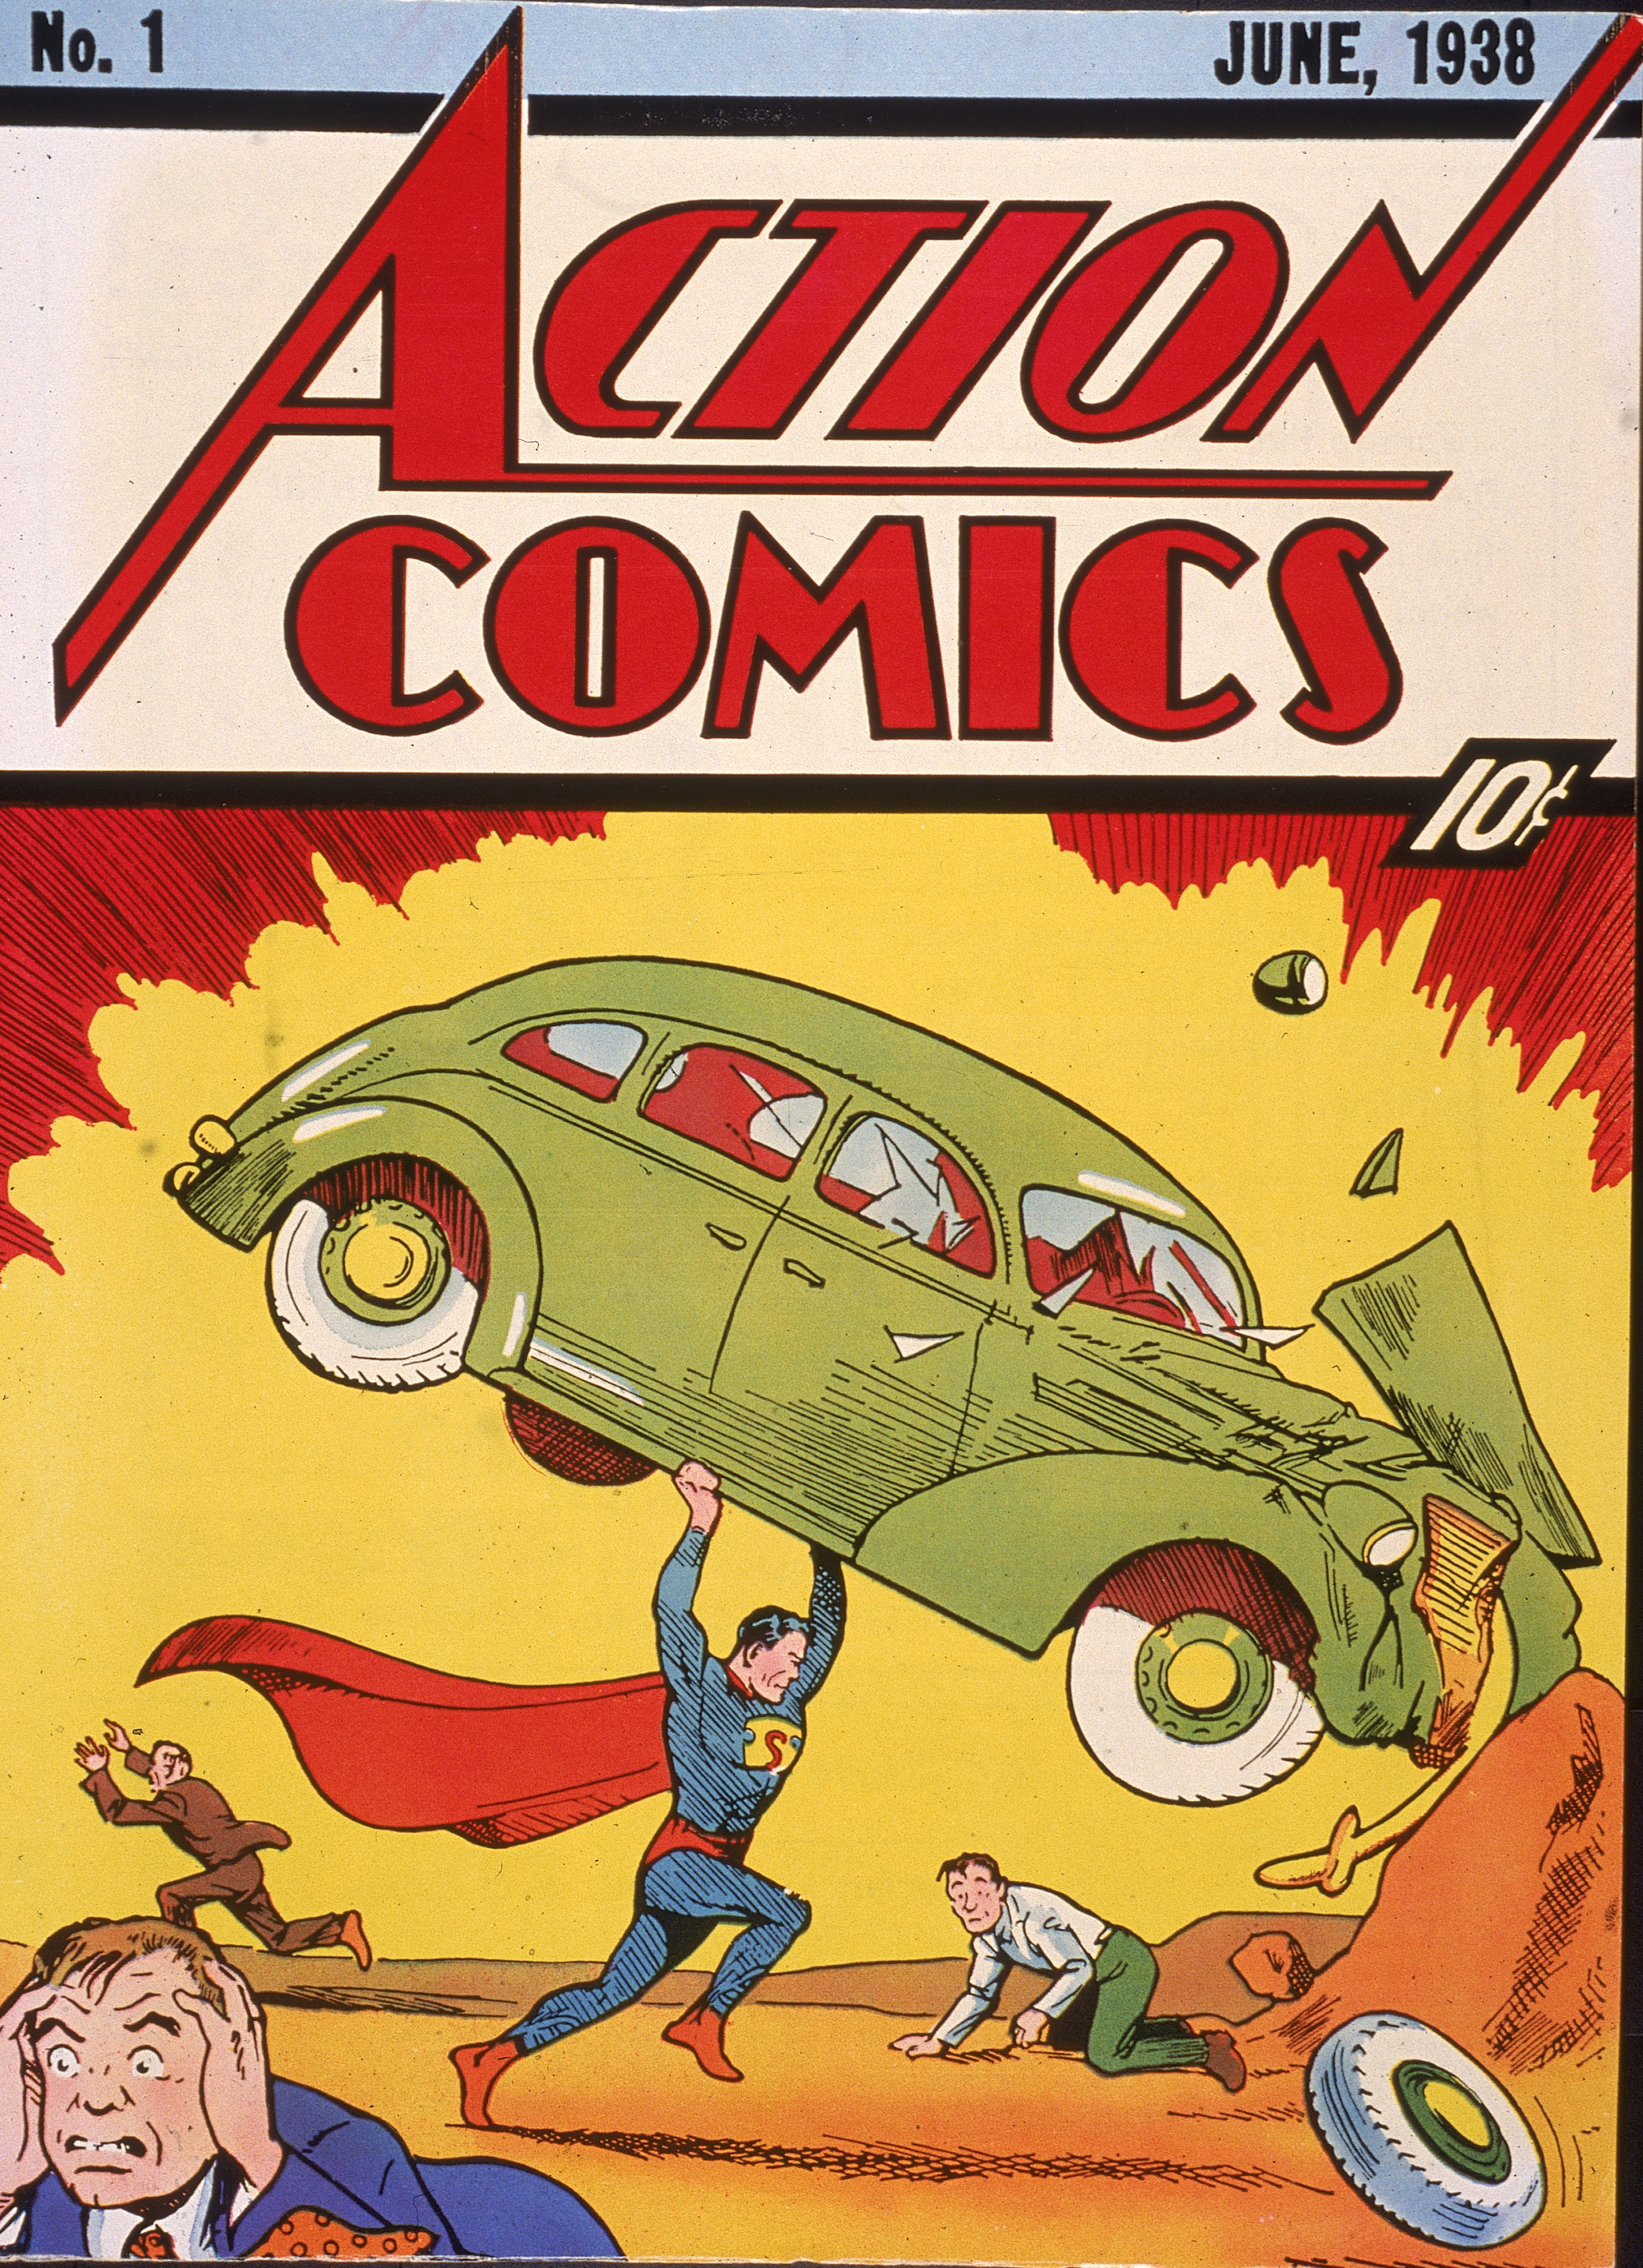 Photo of cover illustration of the comic book Action Comics No. 1 featuring the first appearance of the character Superman (here lifting a car) June 1938. | Source: Getty Images/Hulton Archive